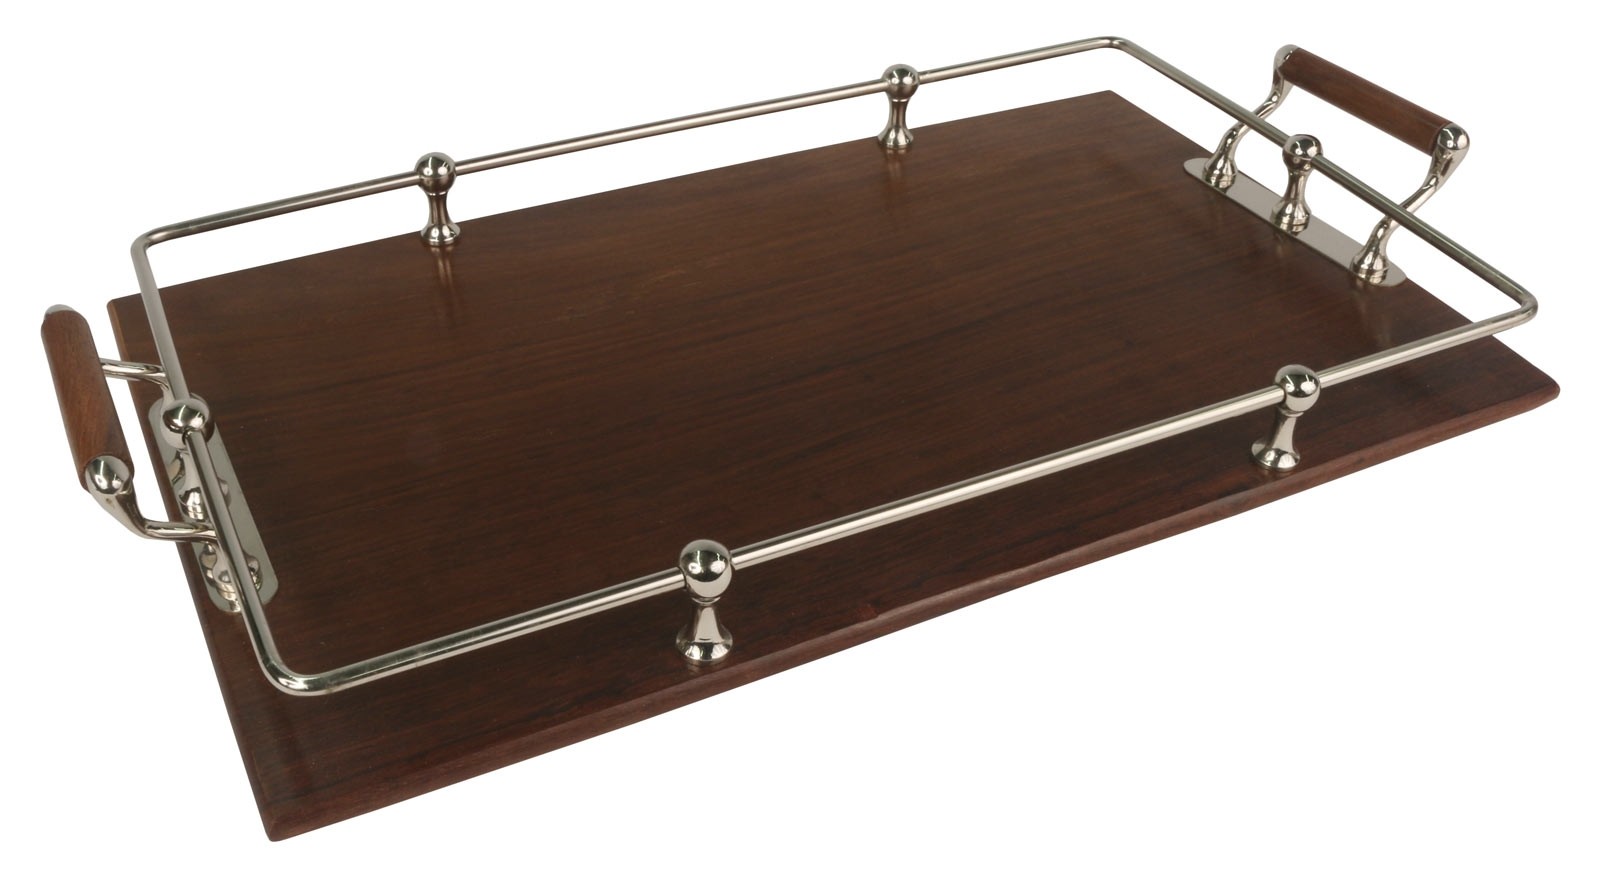 Tray with Handles 45cm